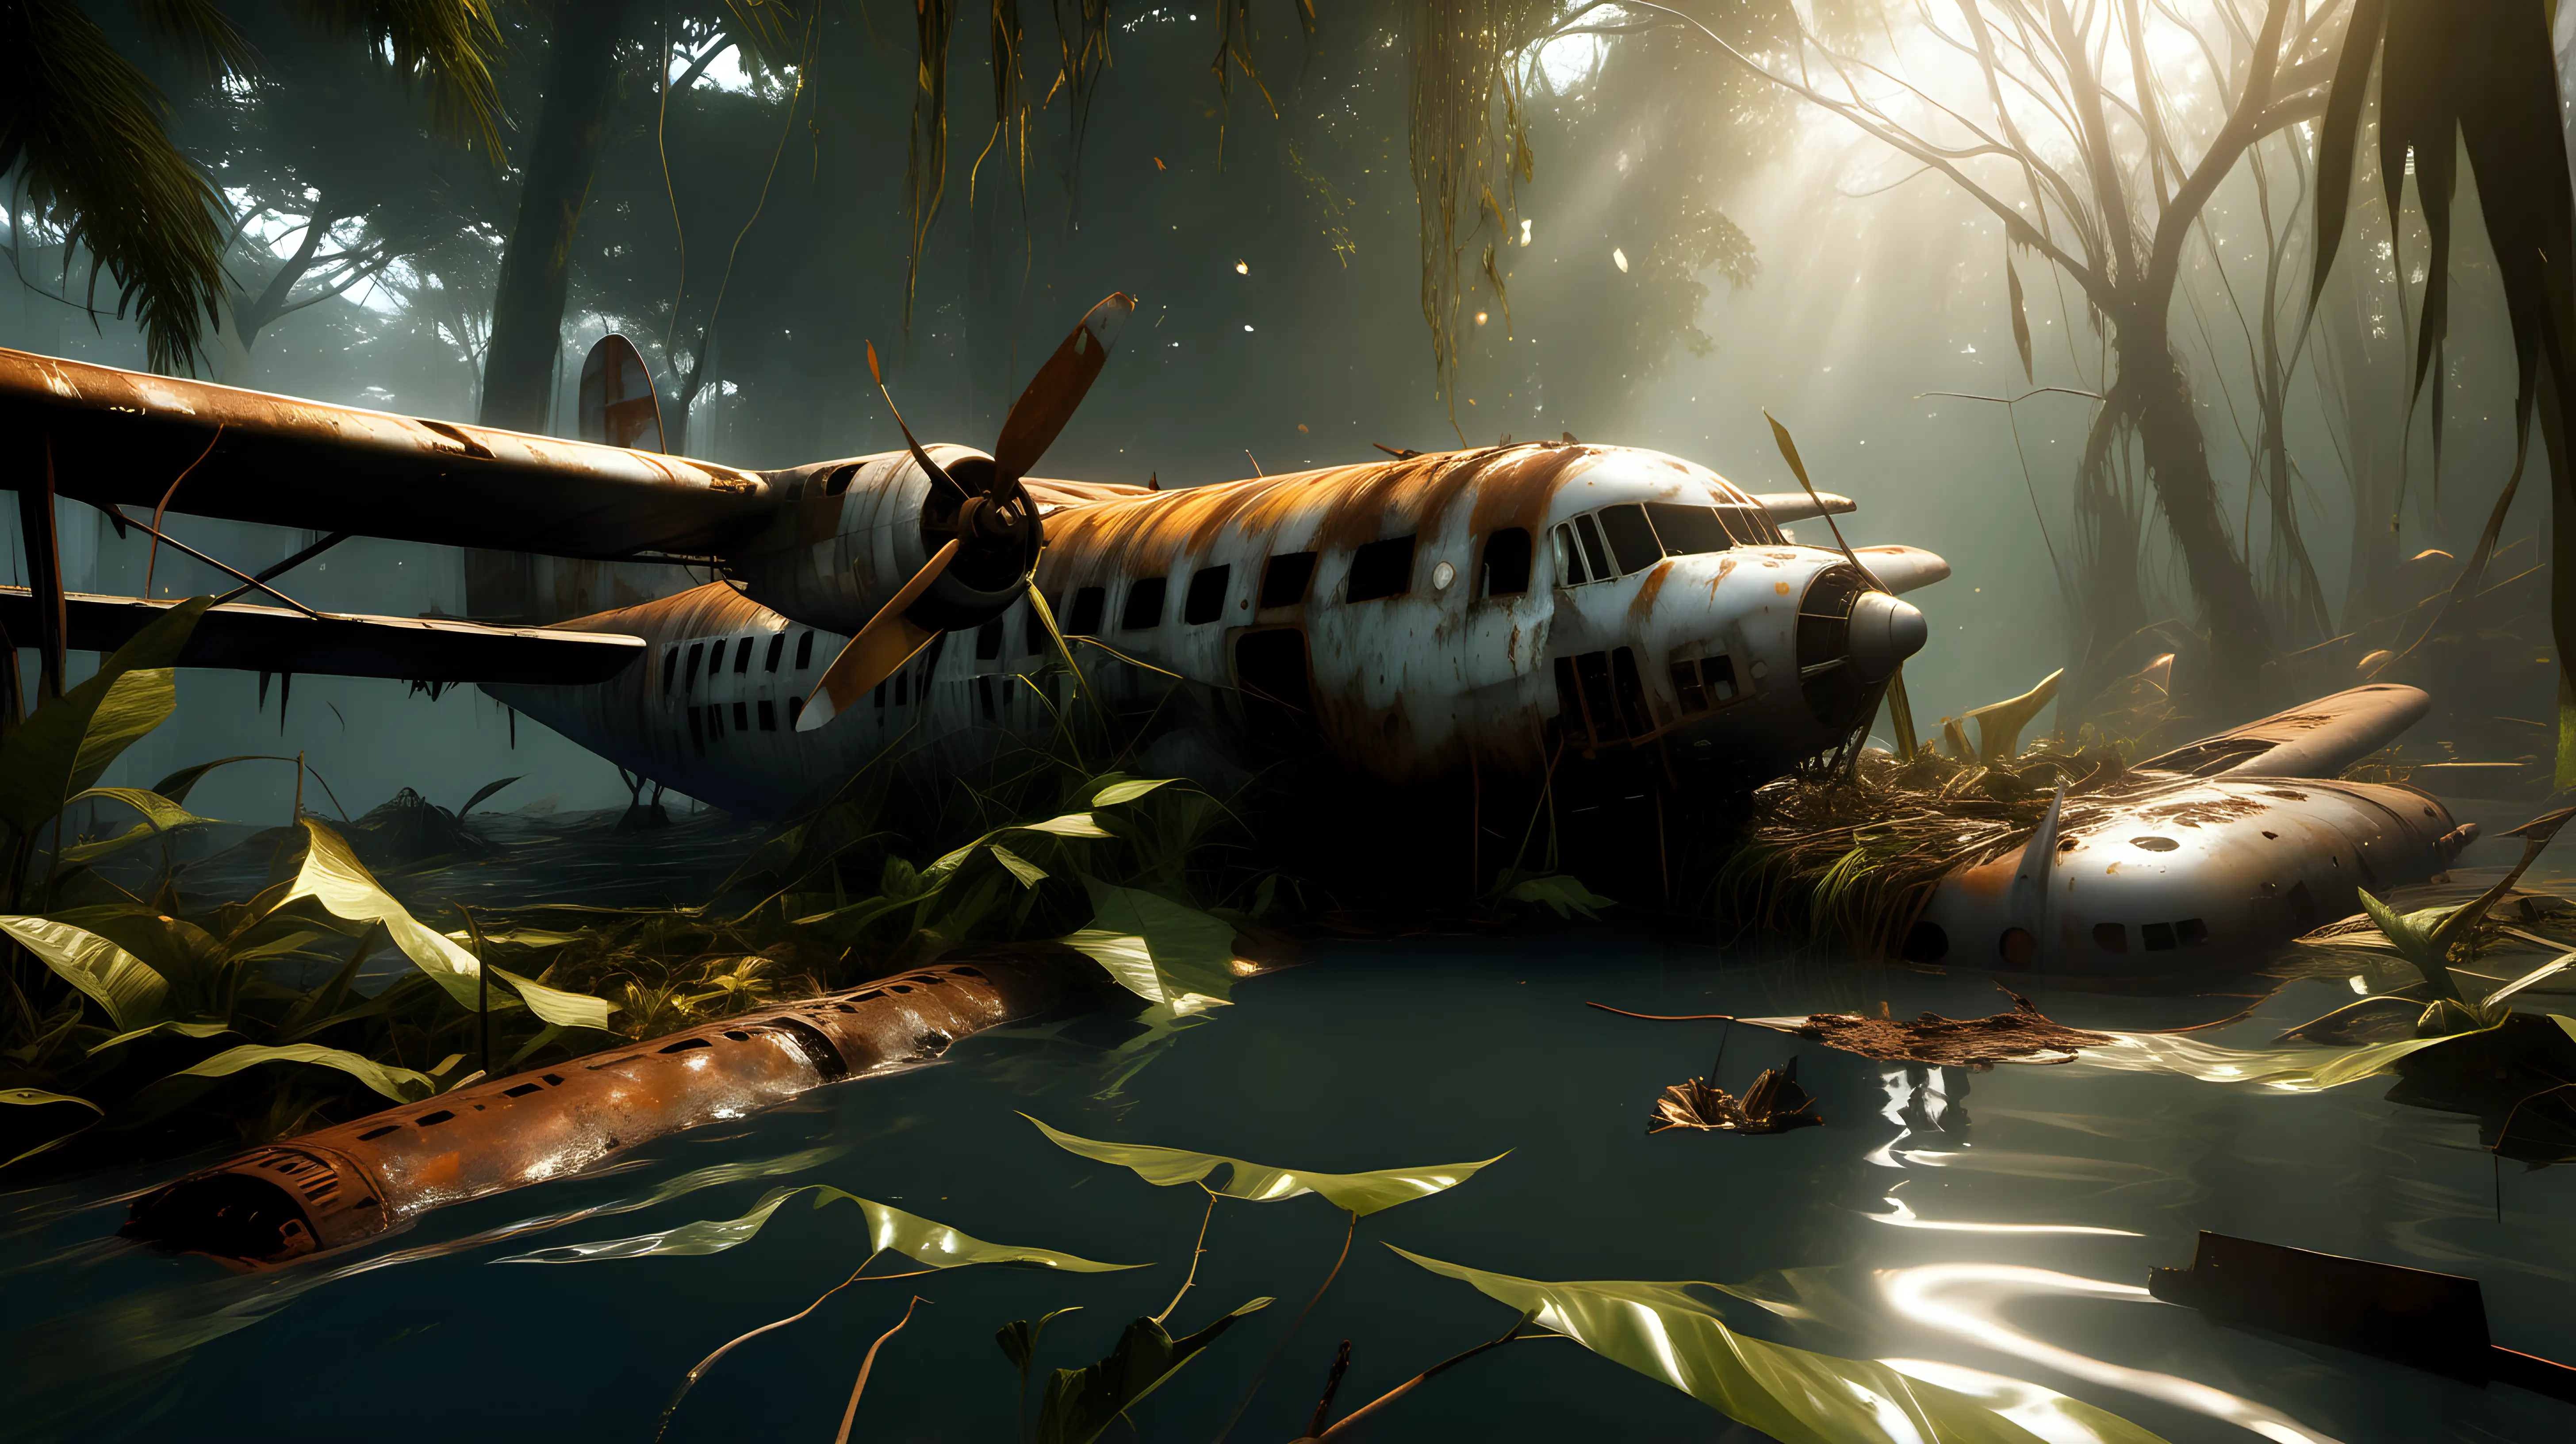 LEFT VIEW, RUSTY, JUNGLE, CLOSE UP, CRASHED PLANE, PLANE SUBMERGE IN MURKY WATER, REALISTIC TREES, GOLDEN SUNLIGHT